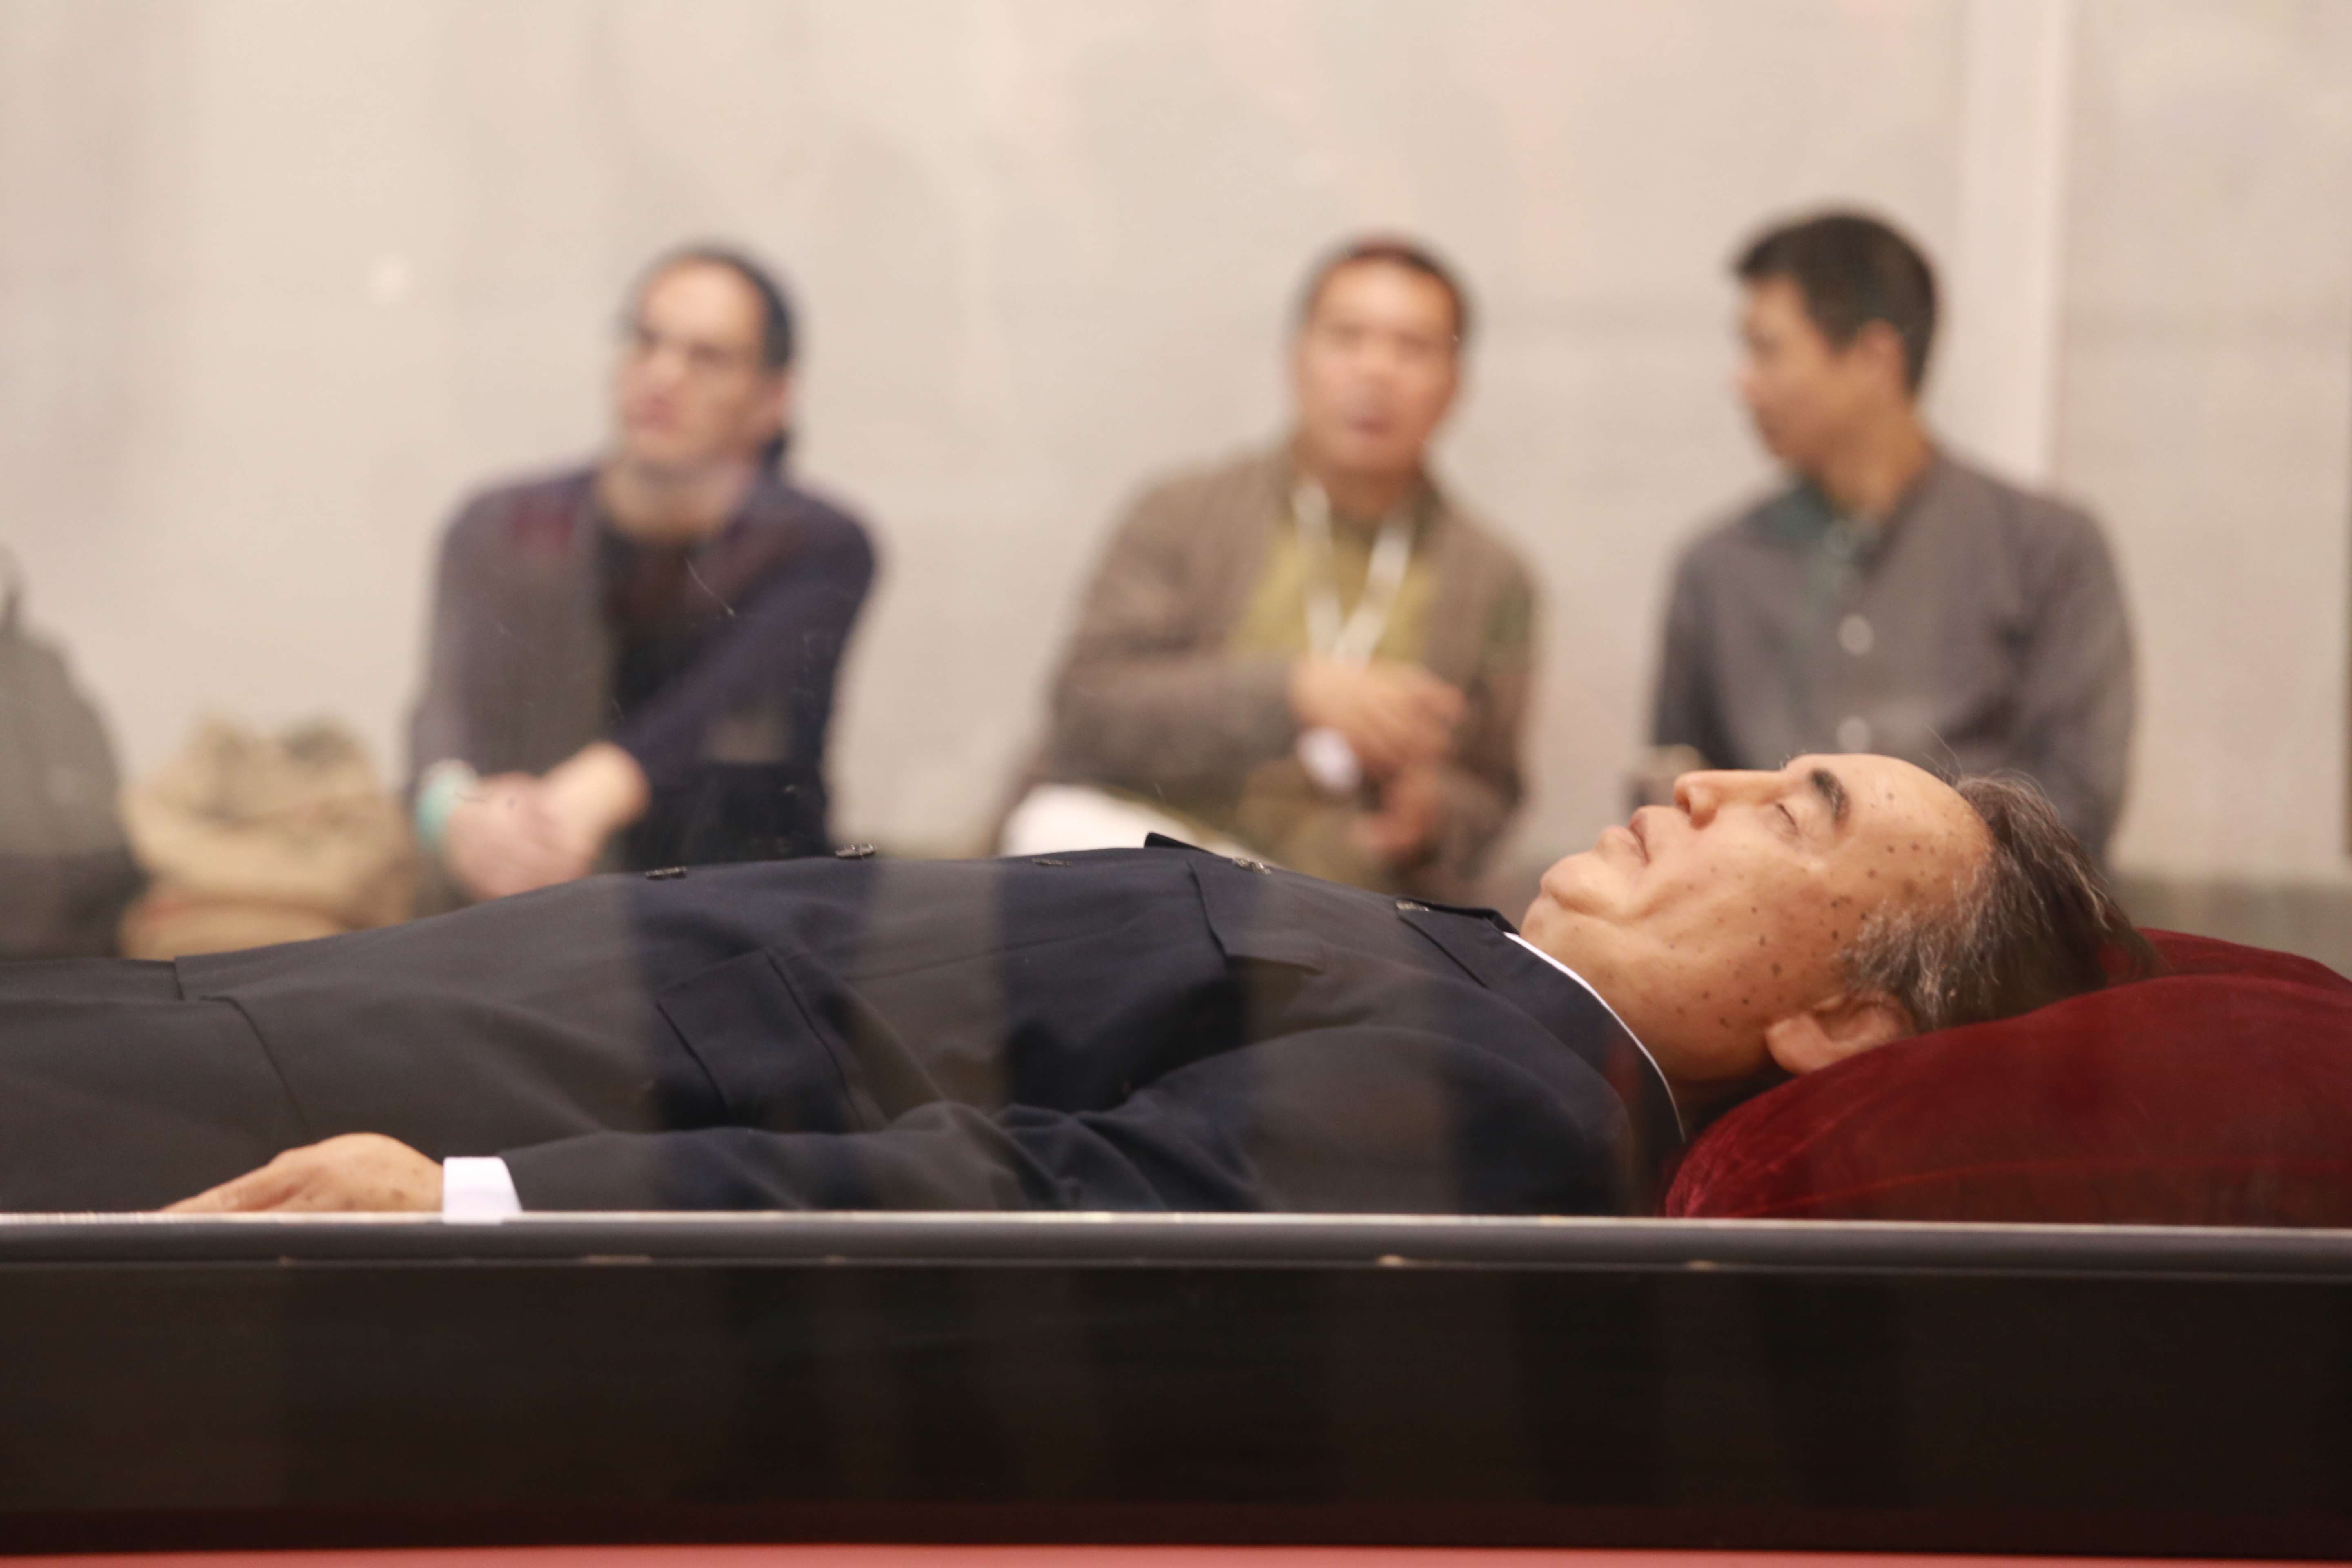 Detail from Shen Shaomin’s installation Summit (2009), showing the corpse of Kim Il-sung in a crystal coffin, at Art Basel Hong Kong. Photo: May Tse